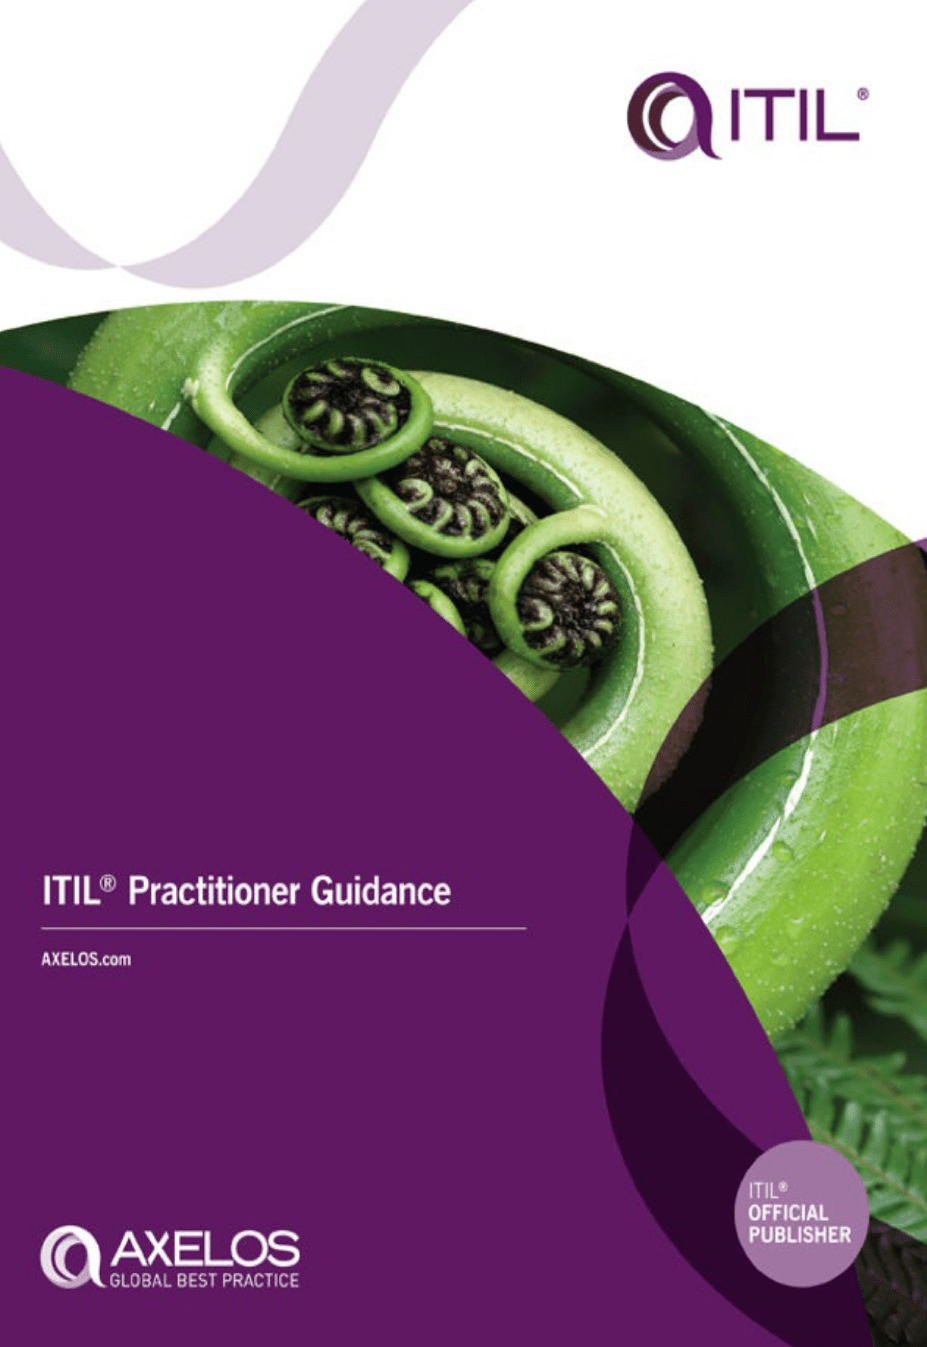 ITIL® Practitioner Guidance book